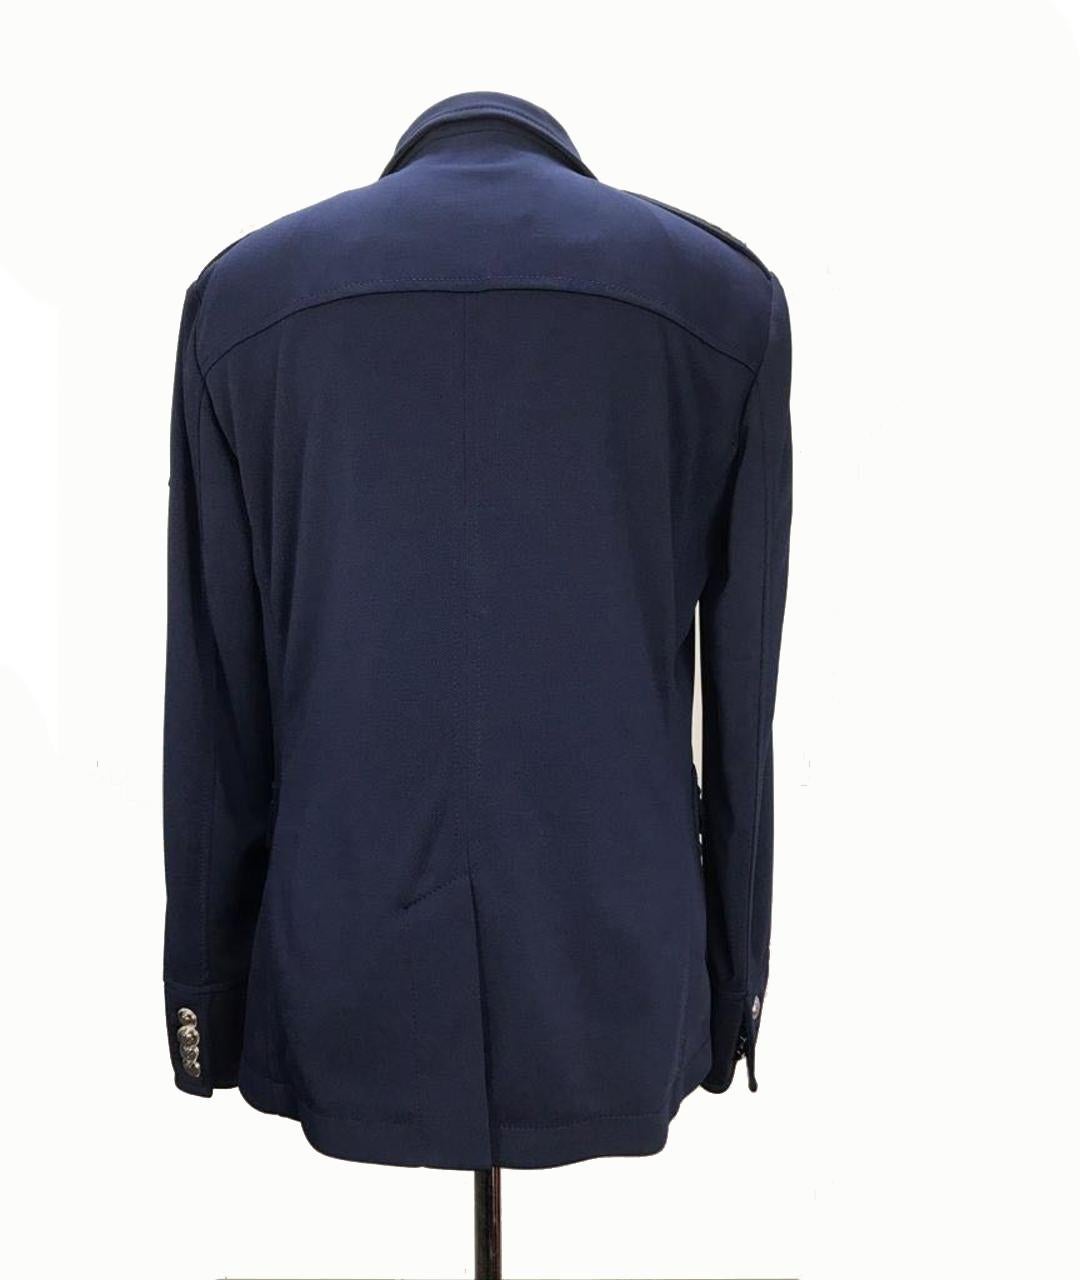 PHILIPP PLEIN

DARK BLUE BLAZER JACKET 3XL from CELEBRITY CLOSET with 

Size 3 XL 

 Brand new, with tags. 
 100% authentic guarantee 

  PLEASE VISIT OUR STORE FOR MORE GREAT ITEMS
os


